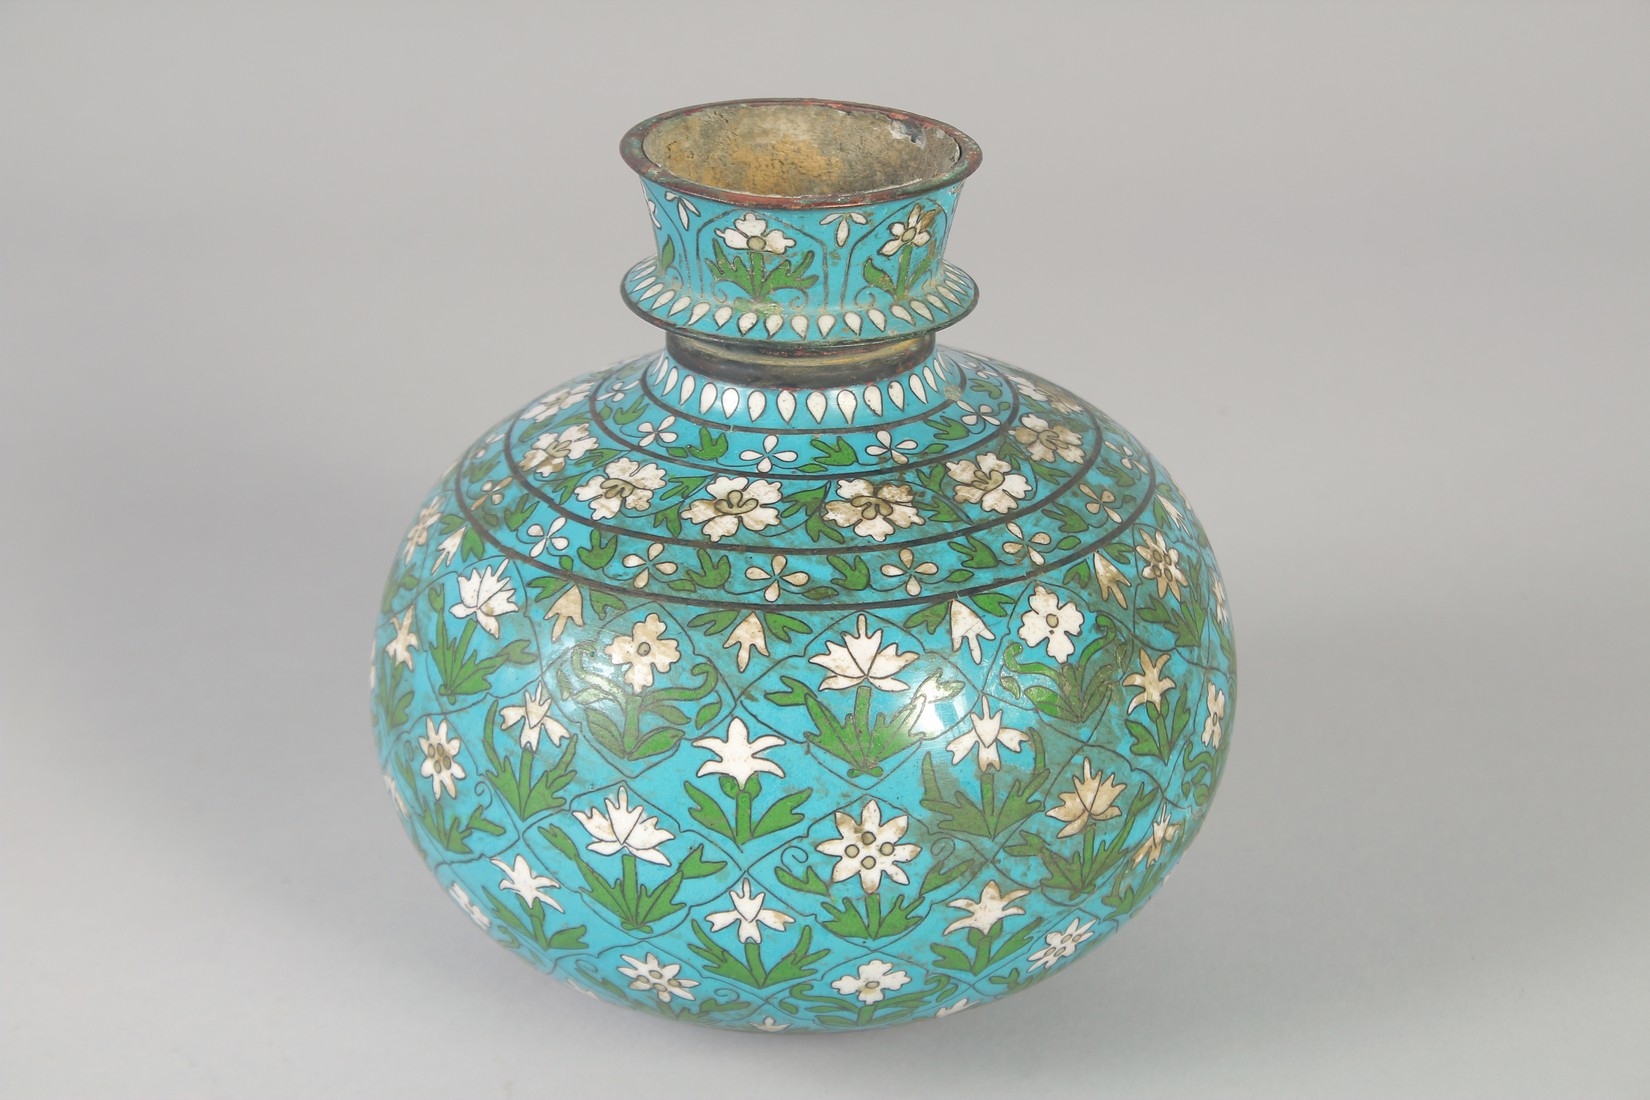 A RARE 19TH CENTURY CHINESE CLOISONNE ENAMELLED HUQQA BASE, for the Islamic Indian market, 15cm - Image 5 of 5